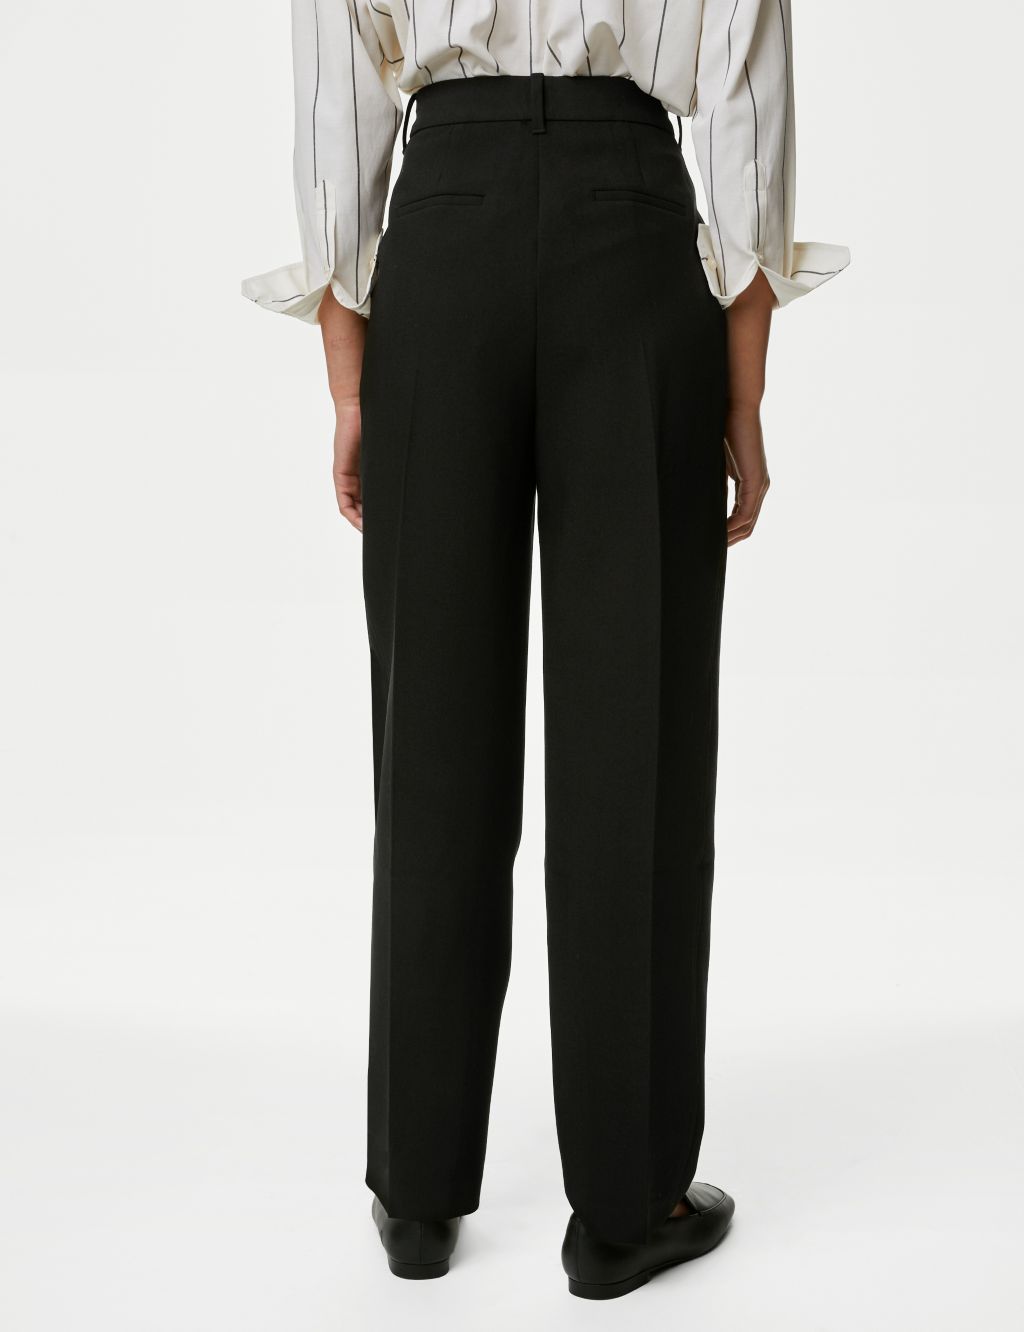 Relaxed Tapered Ankle Grazer Trousers image 5